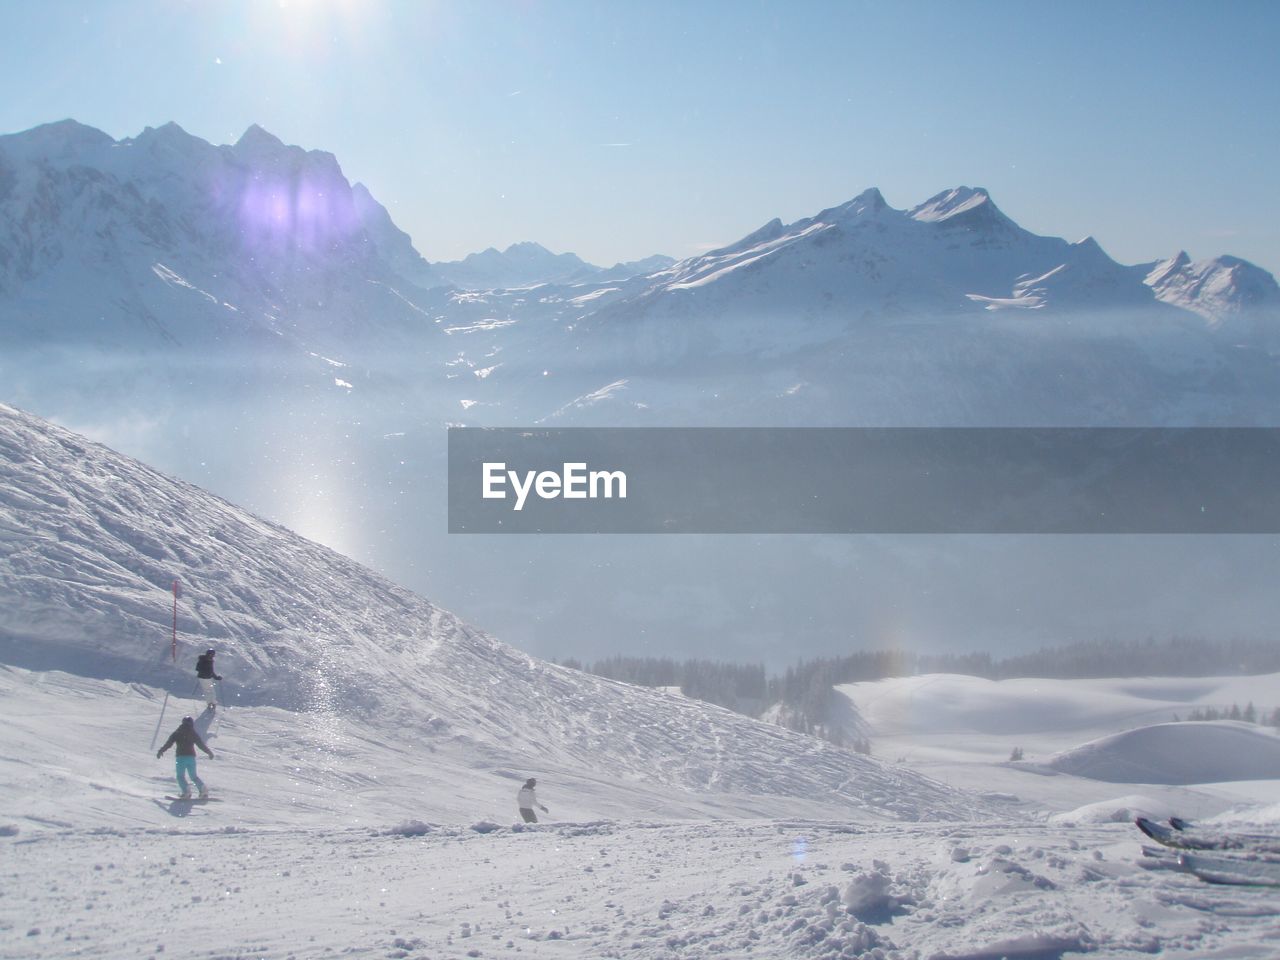 Scenic view of snowboarders in snow covered mountains